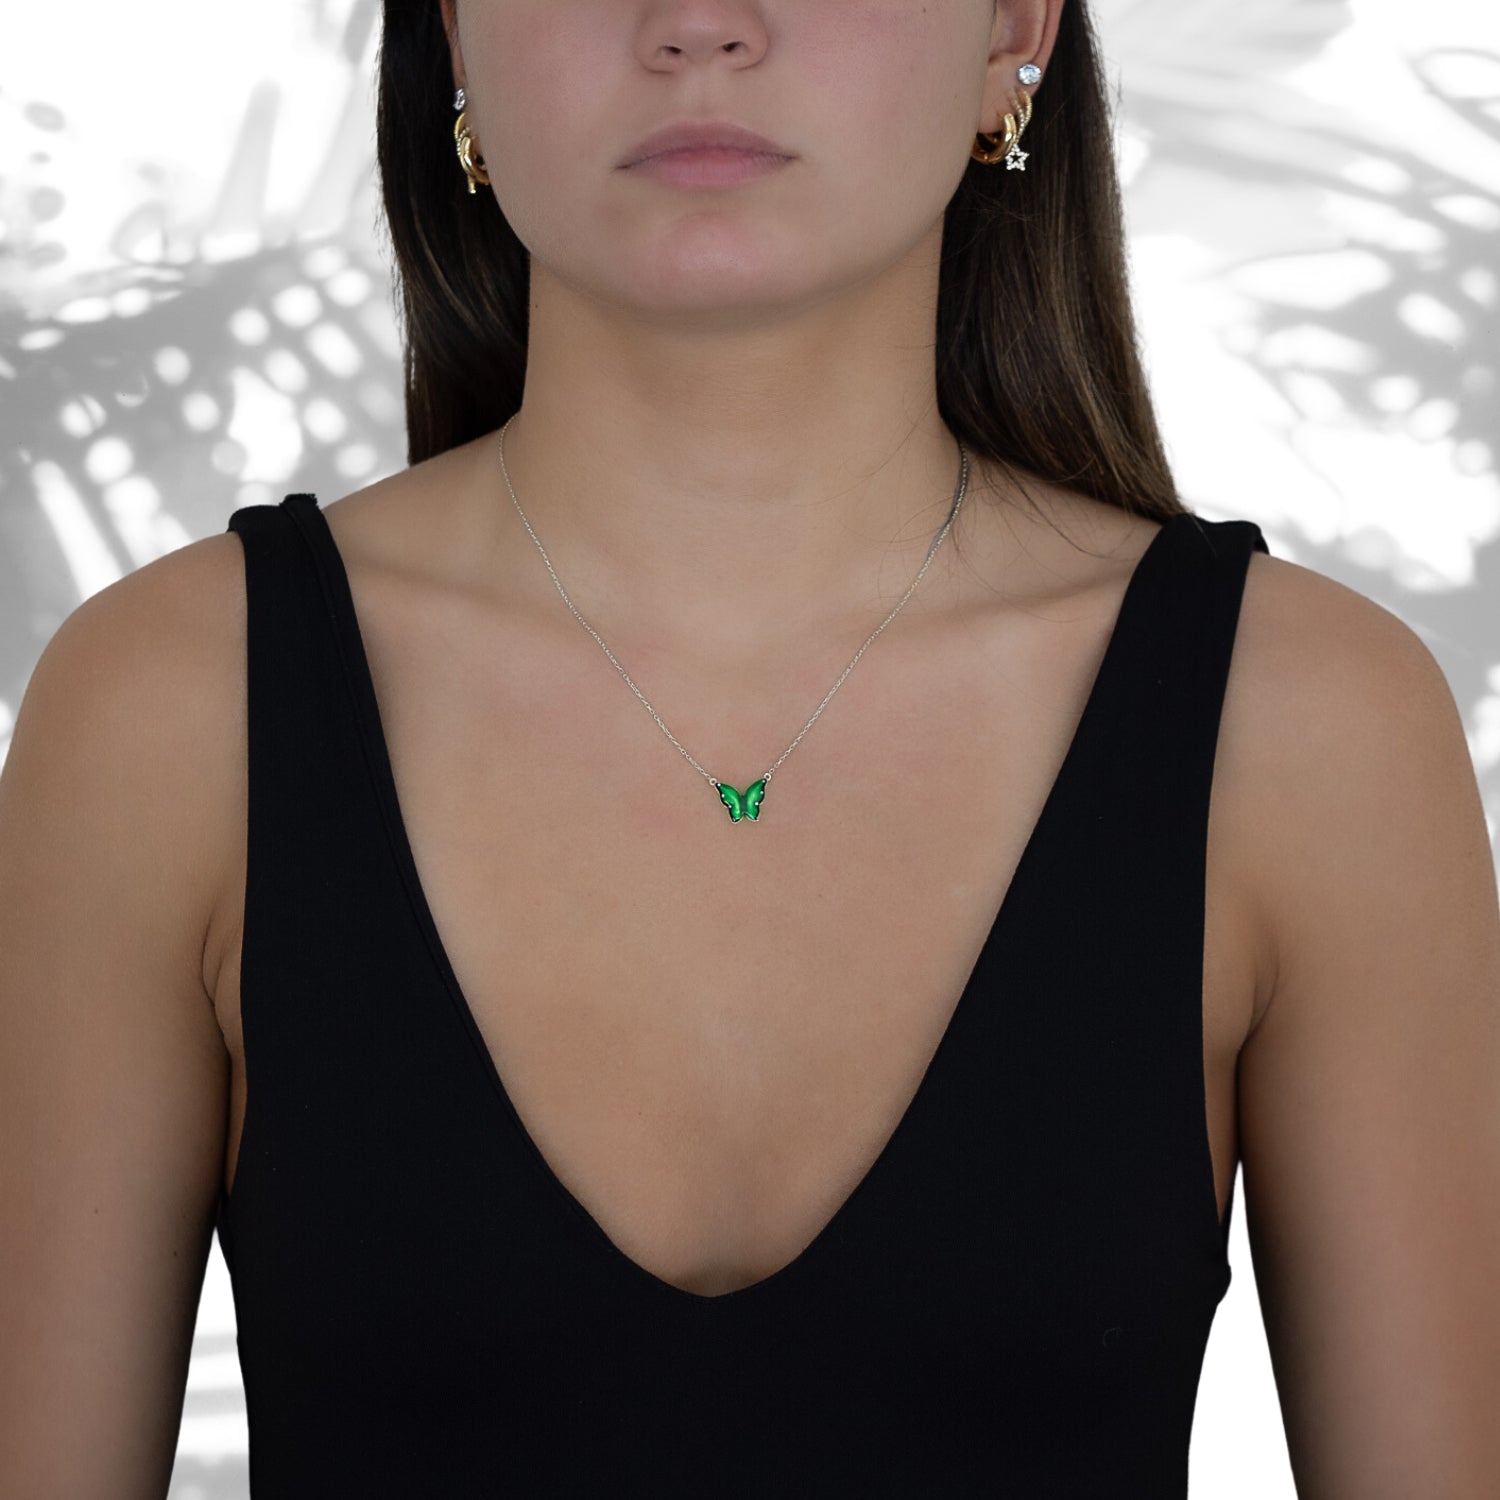 The Silver Abundance Green Enamel Butterfly Necklace complementing the model's style with elegance and transformation.